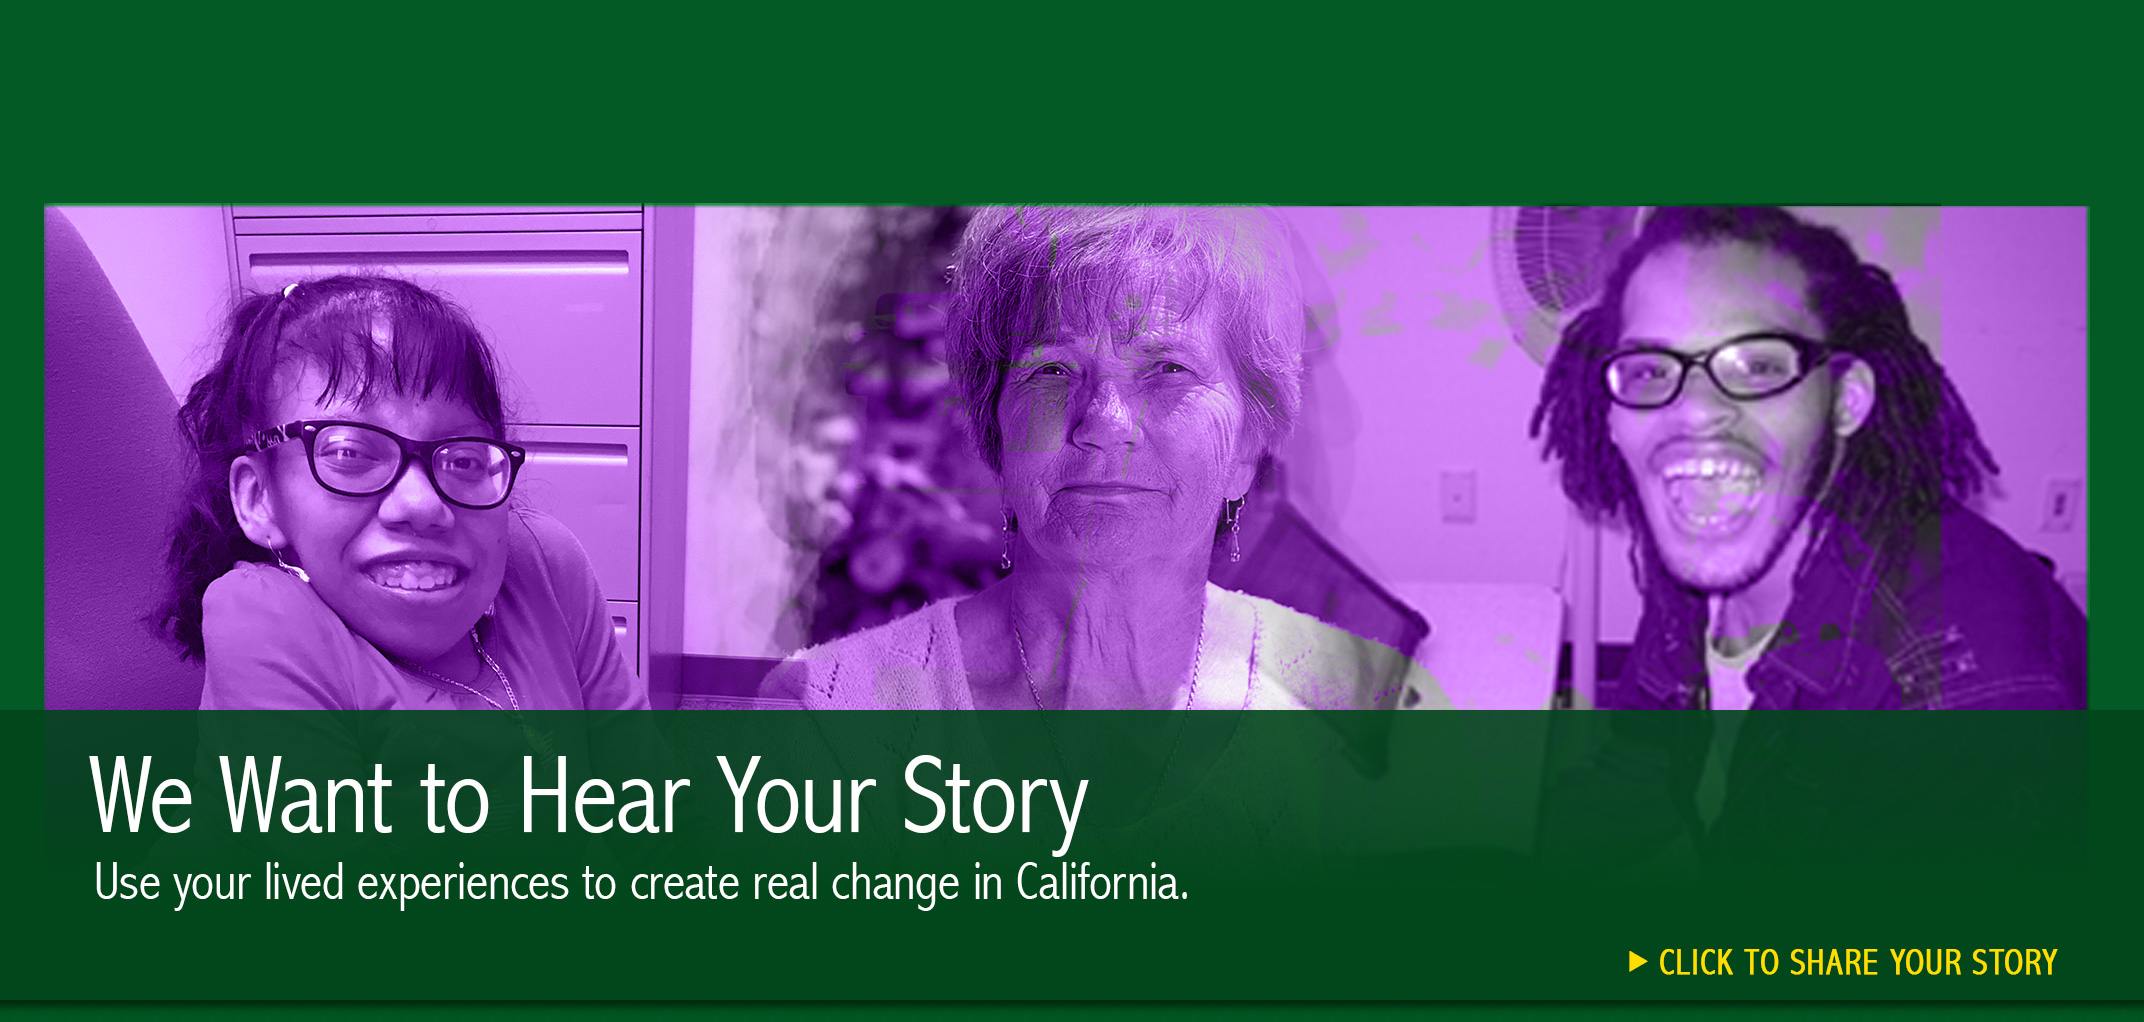 We Want to Hear Your Story. Use your lived experiences to create real change in California. Click to share your story. Collage photo of persons with disabilities and an older adult.